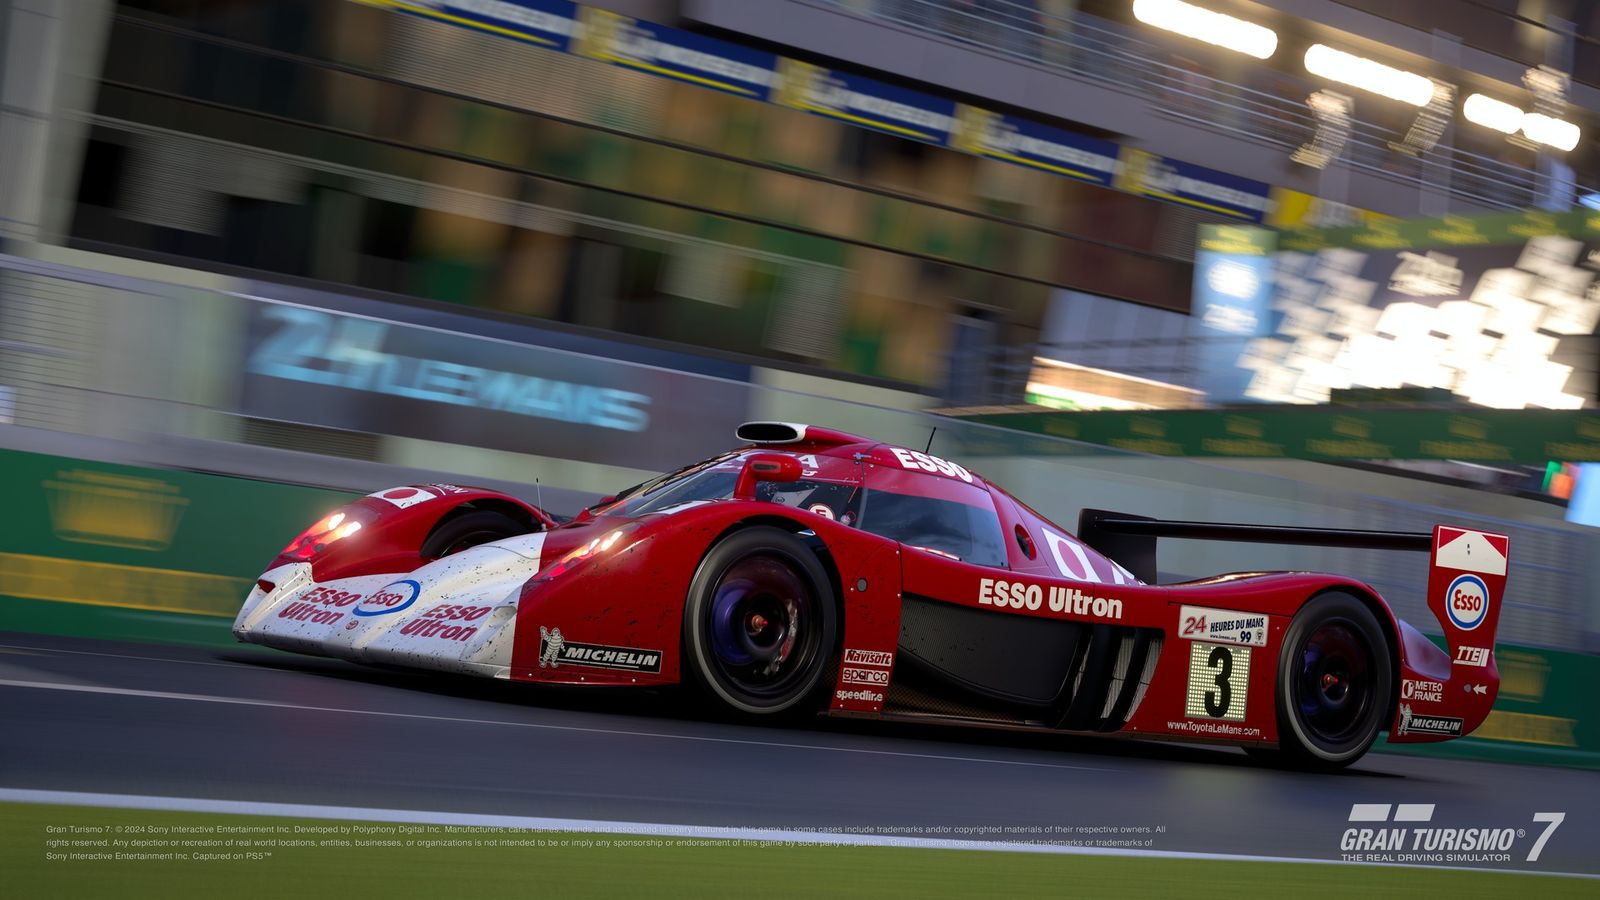 Gran Turismo 7 Update 1.44 Adds 3 New Cars This Week